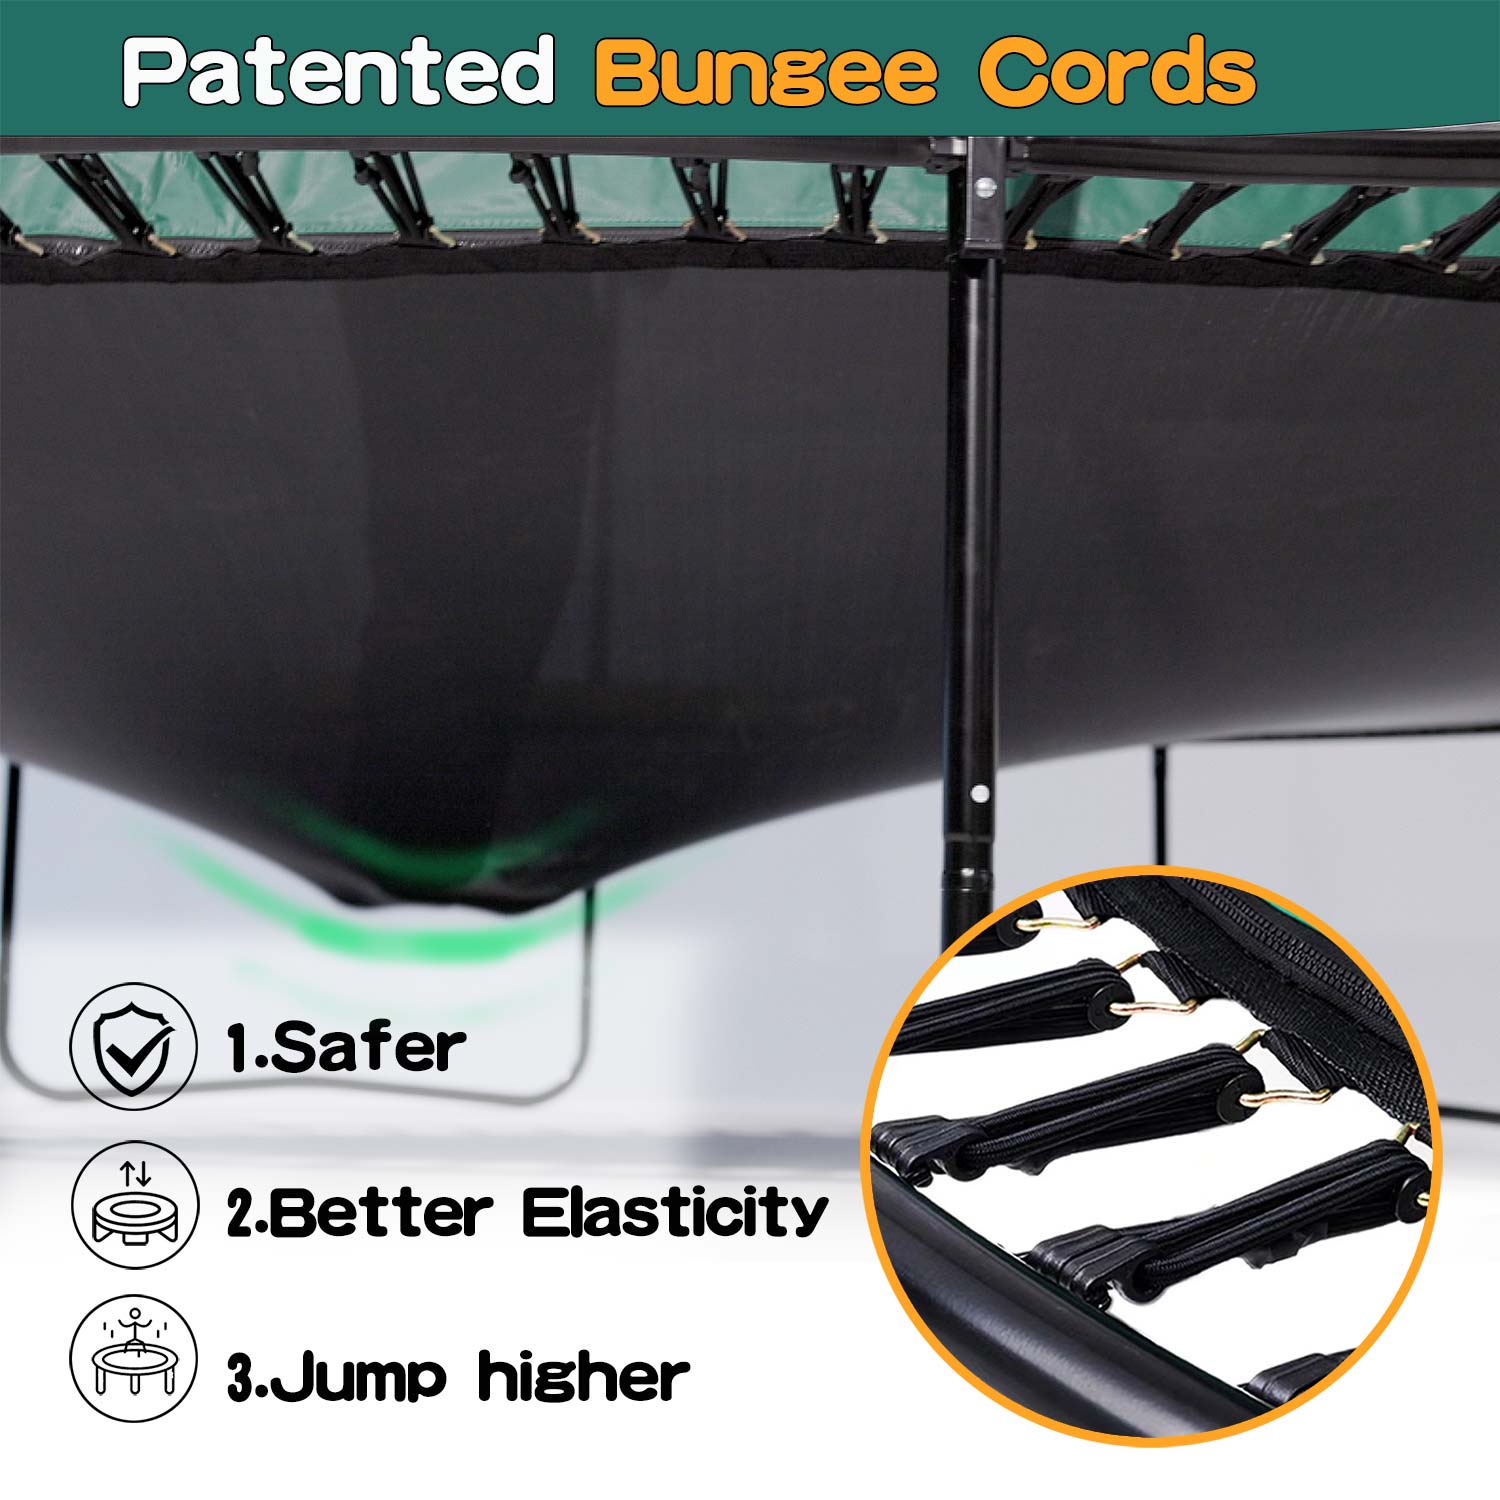 Title: Patent Bungee Cord Description: Above, there is a highly elastic trampoline jumping cloth on display. Below, there is a detailed image of the bungee cord, with "Safety, Better Elasticity, Jump Higher" written next to it.